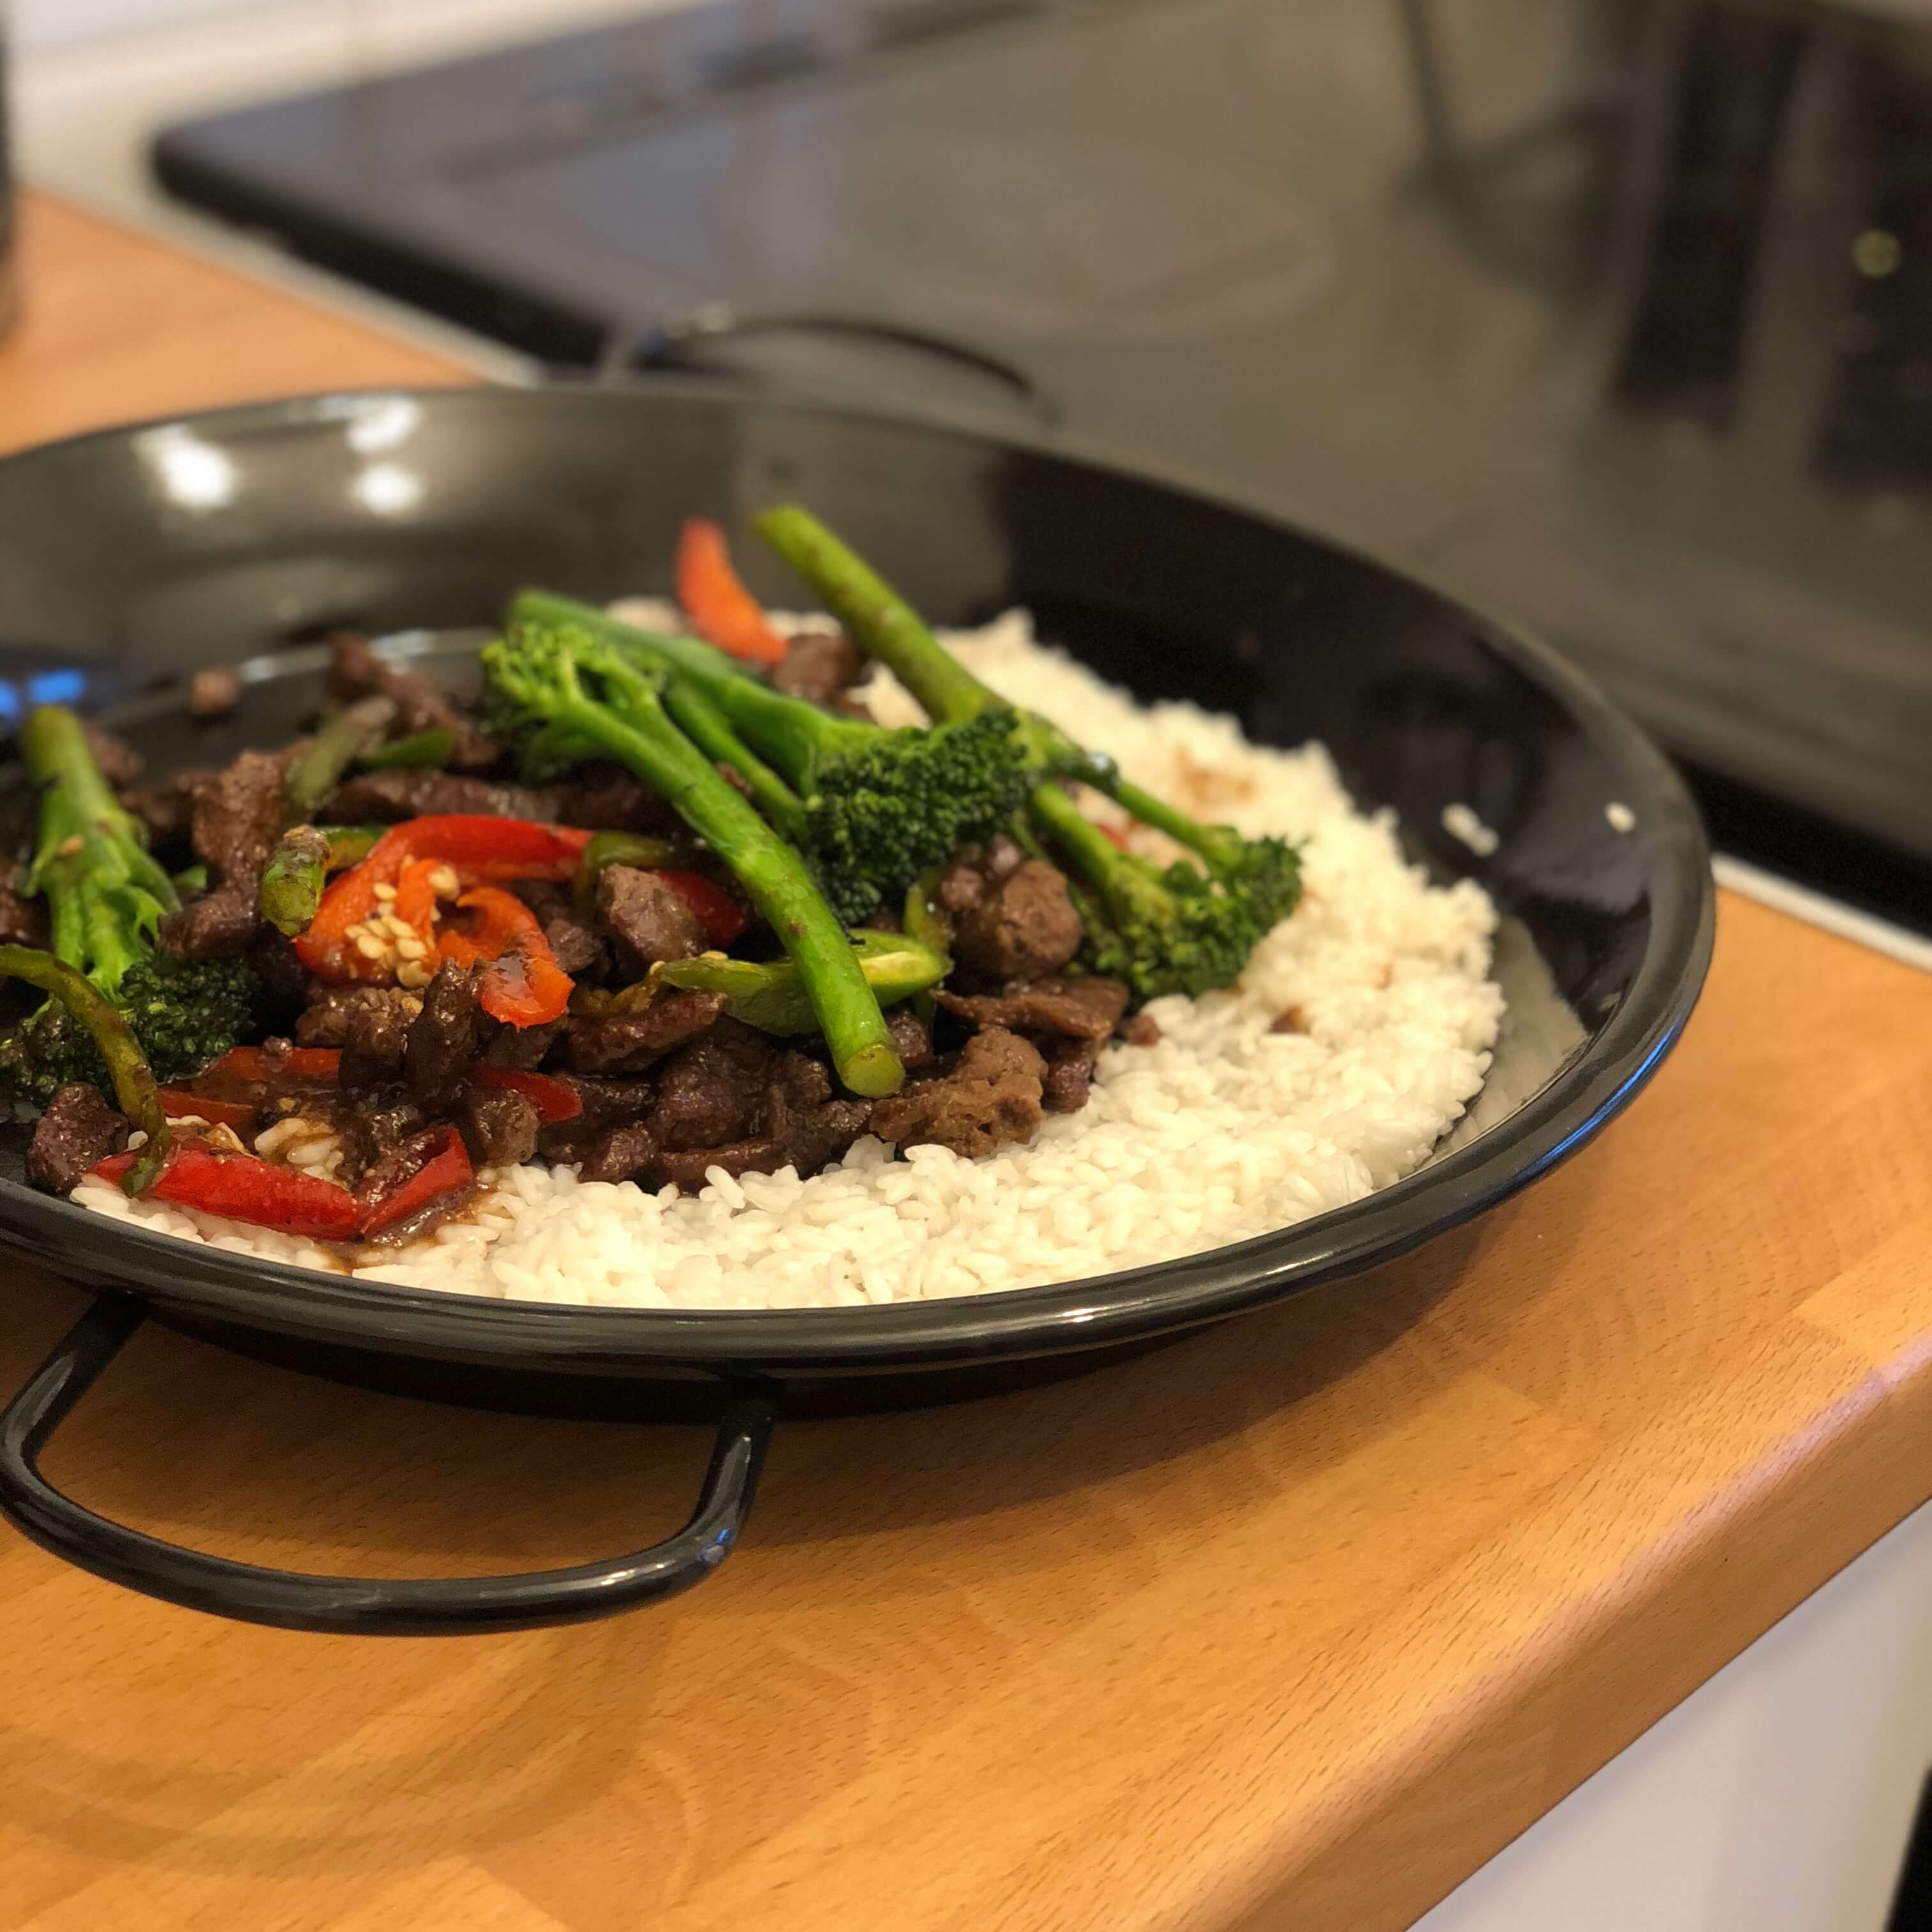 nate’s beef stir fry on a bed of rice recipe